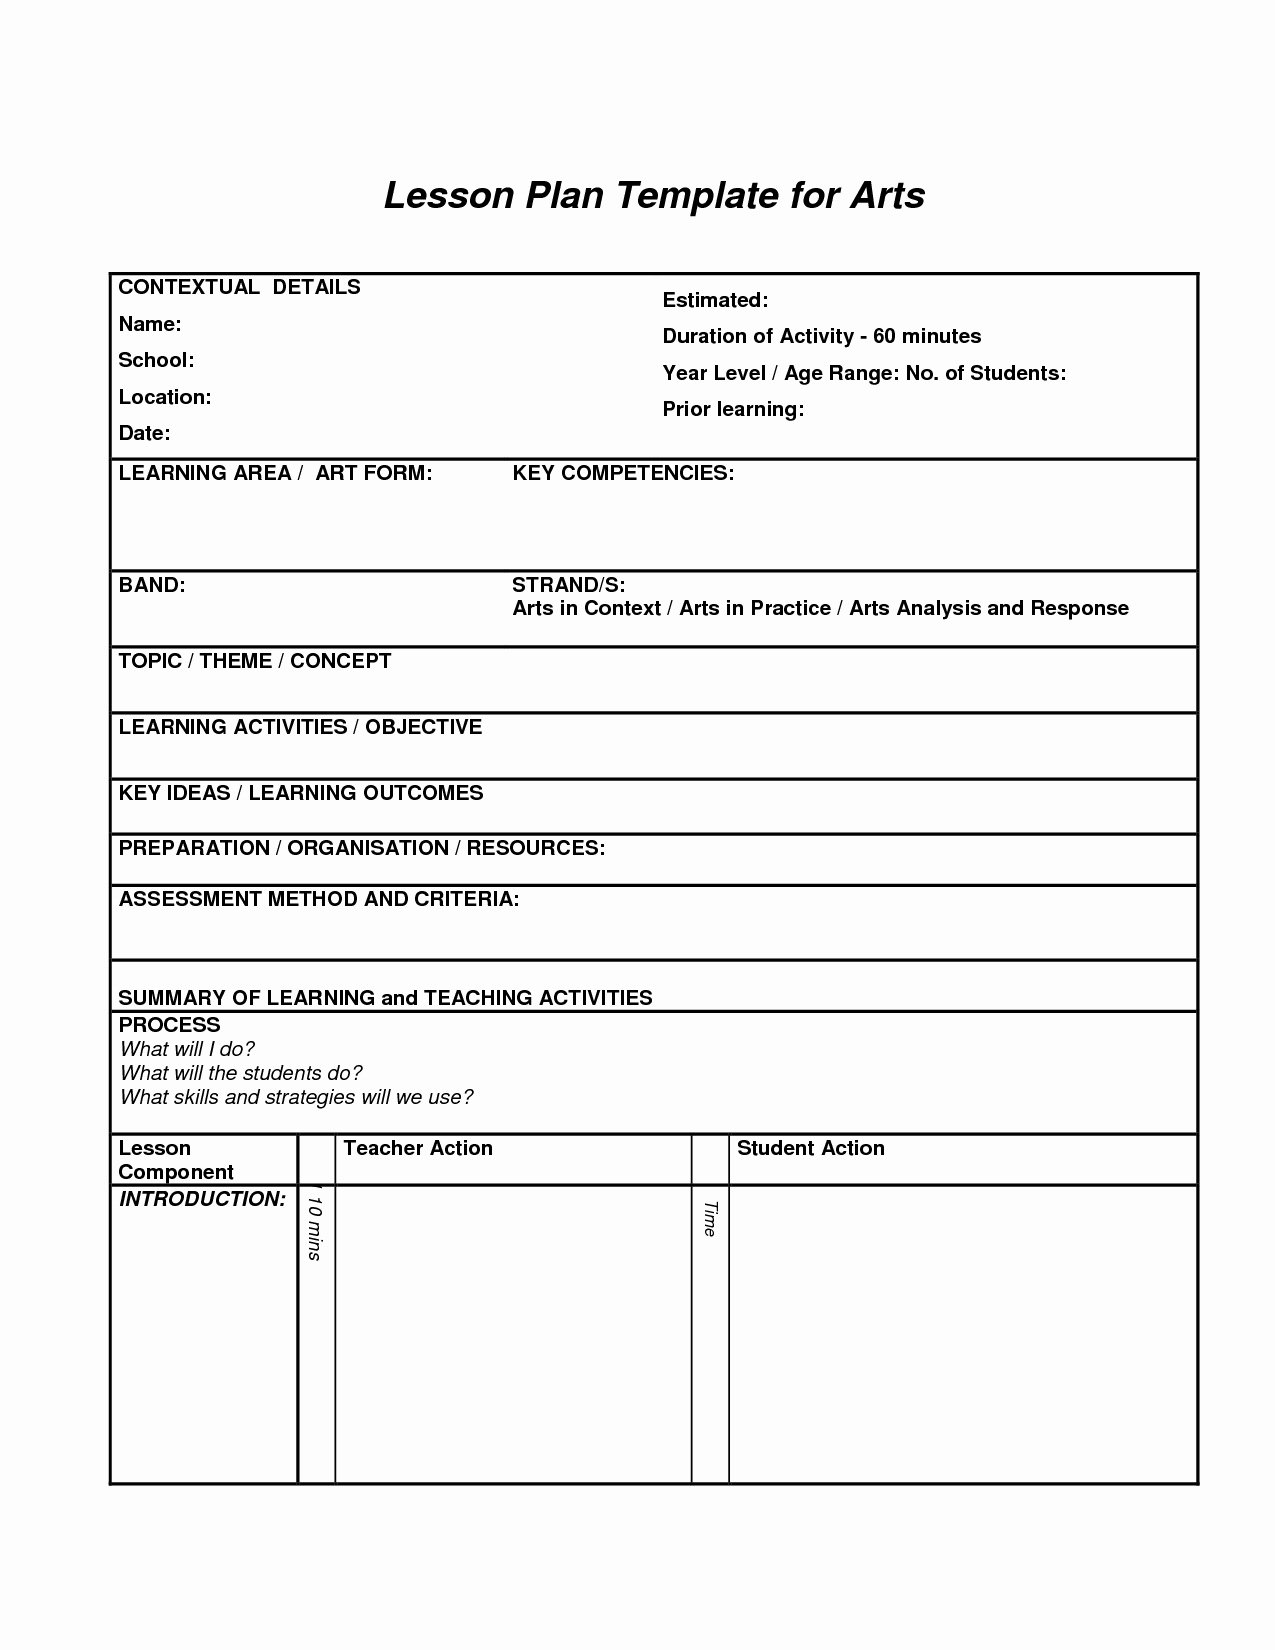 Edtpa Lesson Plan Template 2017 Luxury Edtpa Lesson Plan Template Word Document